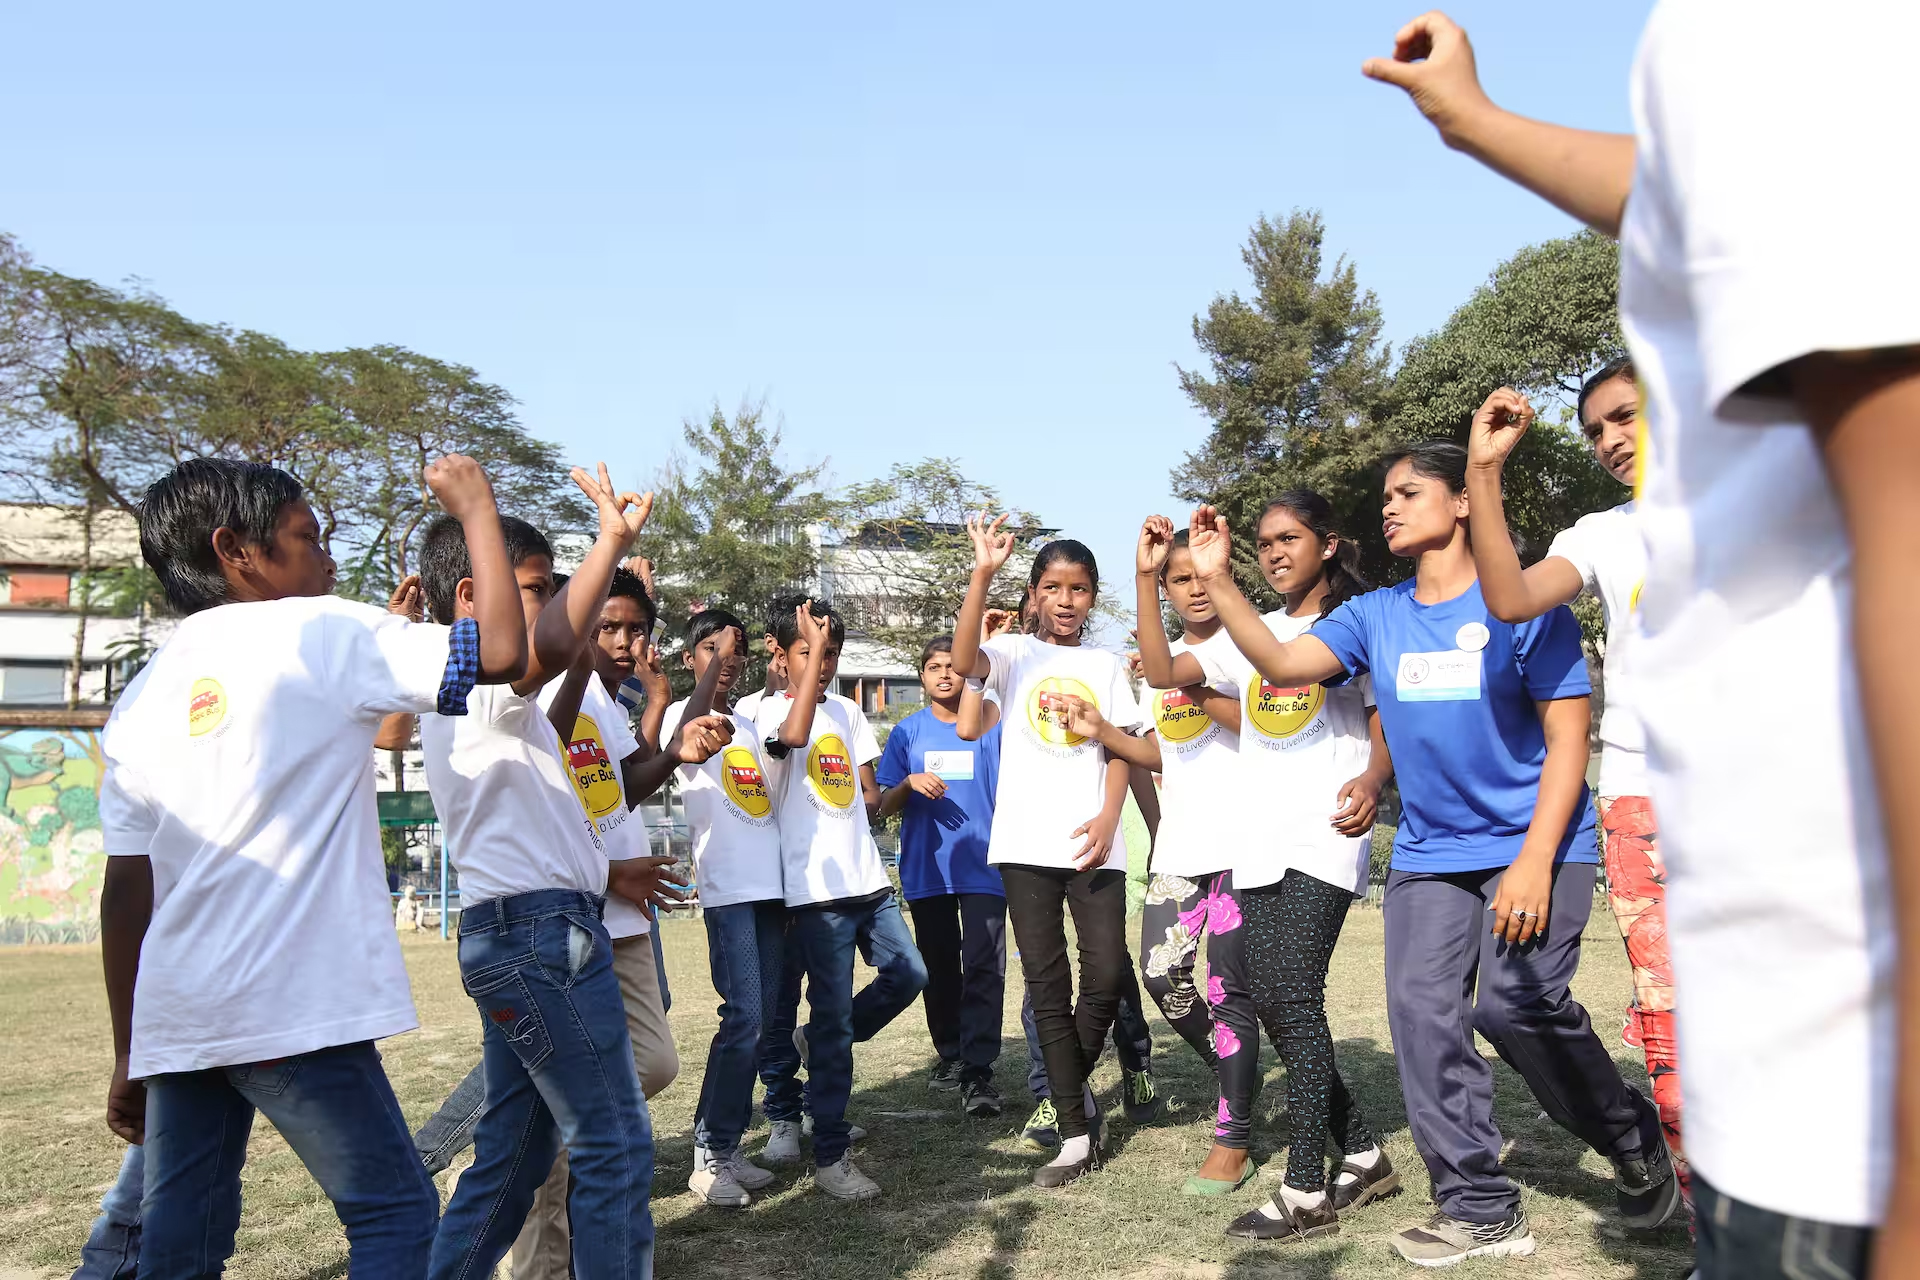 Manchester City And Etihad Airways Announce Launch Of Community Football Projects Across India